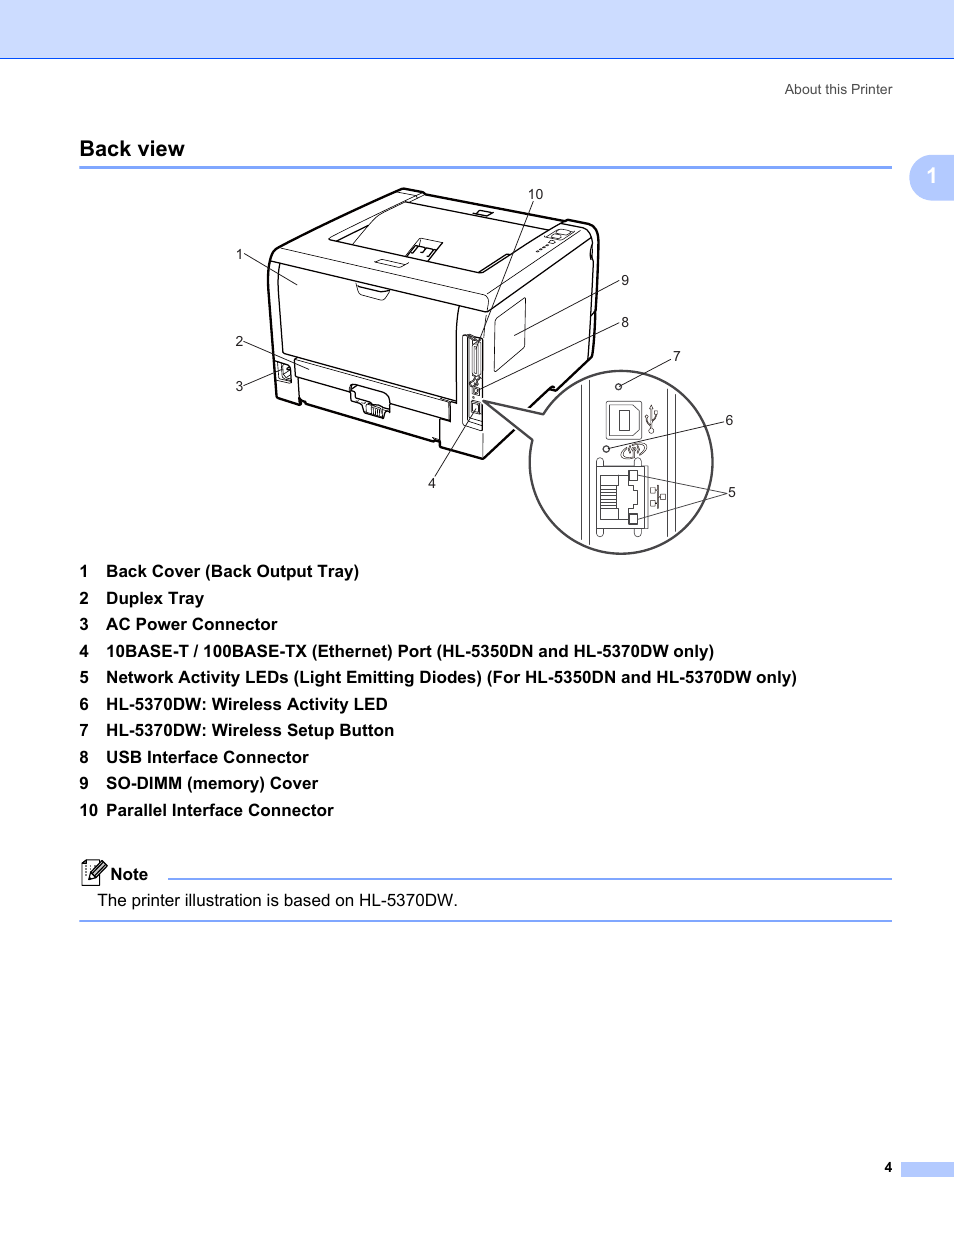 Back view, 1back view, The printer illustration is based on hl-5370dw